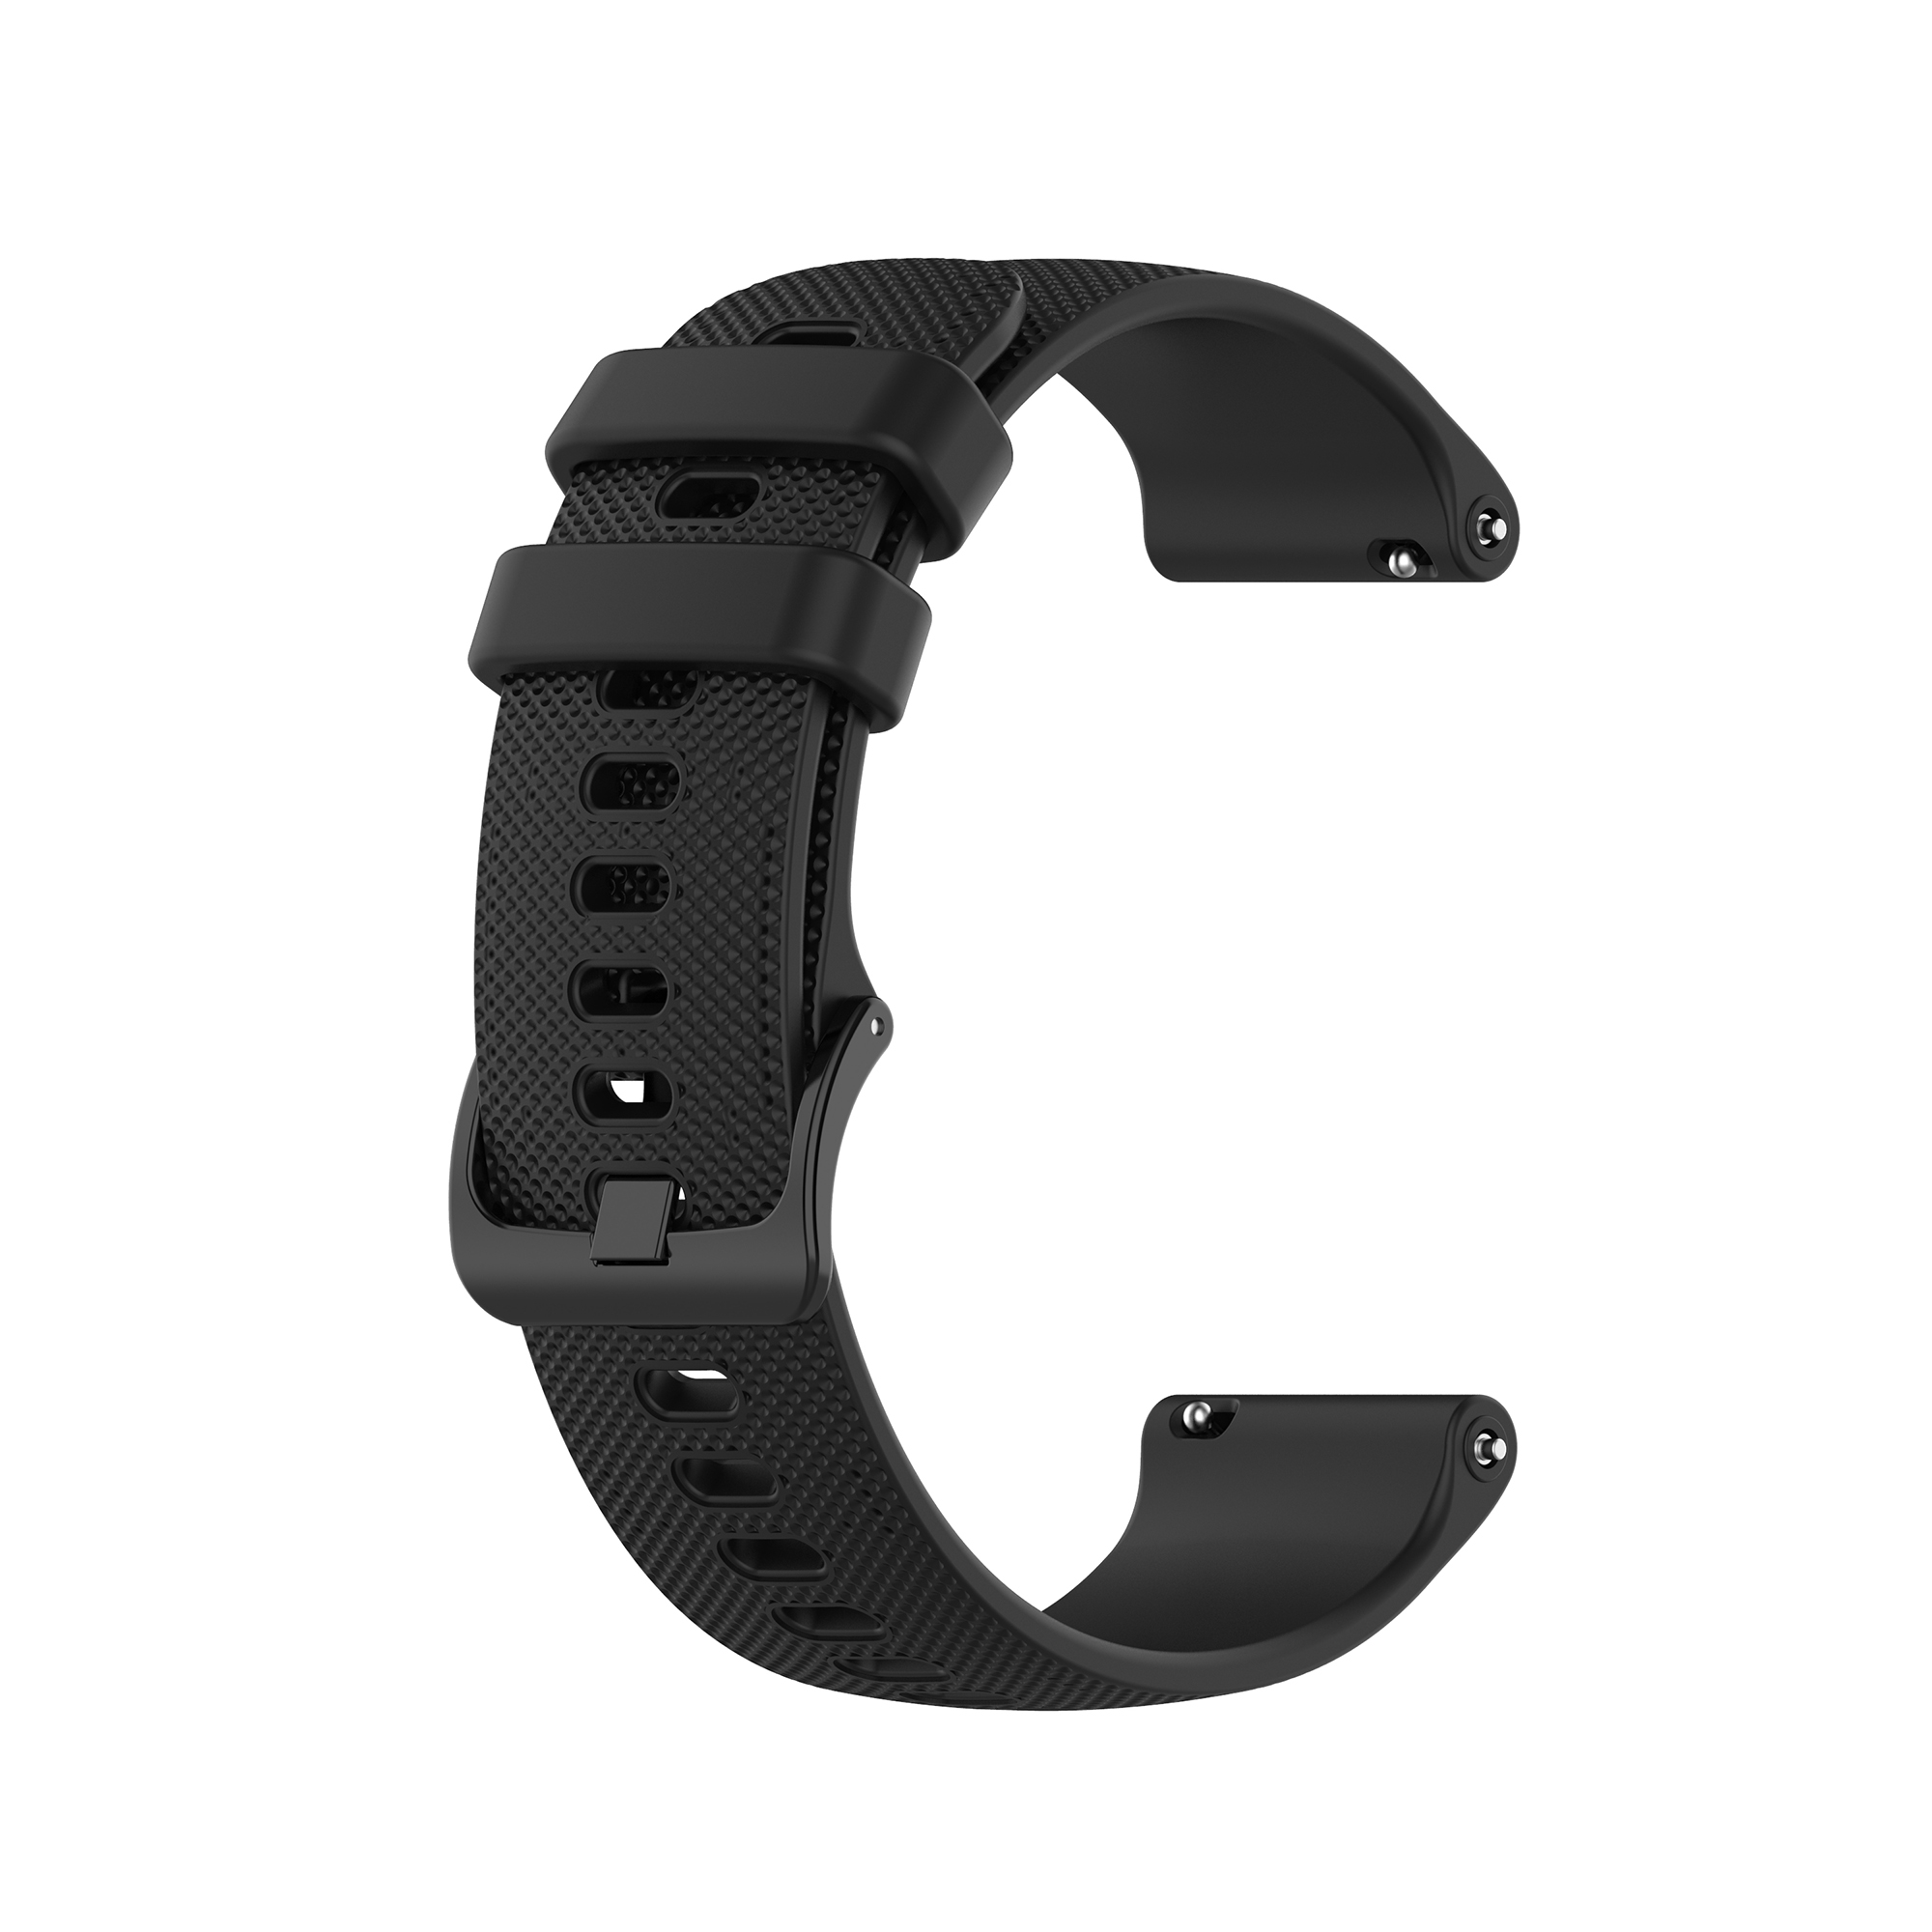 20mm-Width-Soft-Silicone-Watch-Band-Watch-Strap-Replacement-for-lrmGarmin-Venu-SQ-BW-HL1-HL2-Haylou--1805584-5